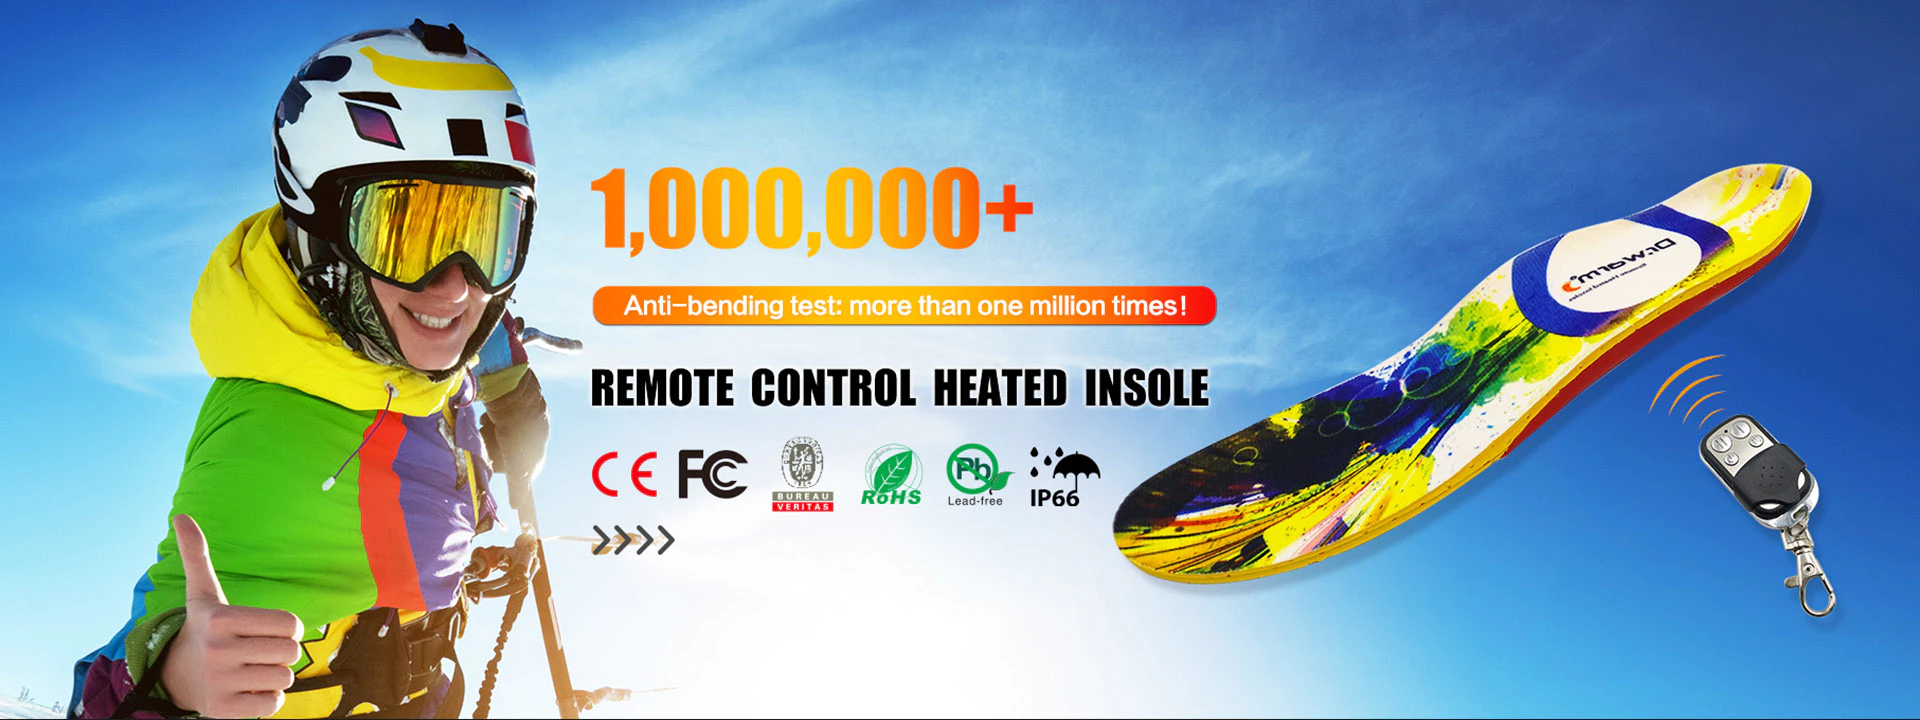 Dr. Warm control the best heated insoles lasts for 3-7hours for ice house